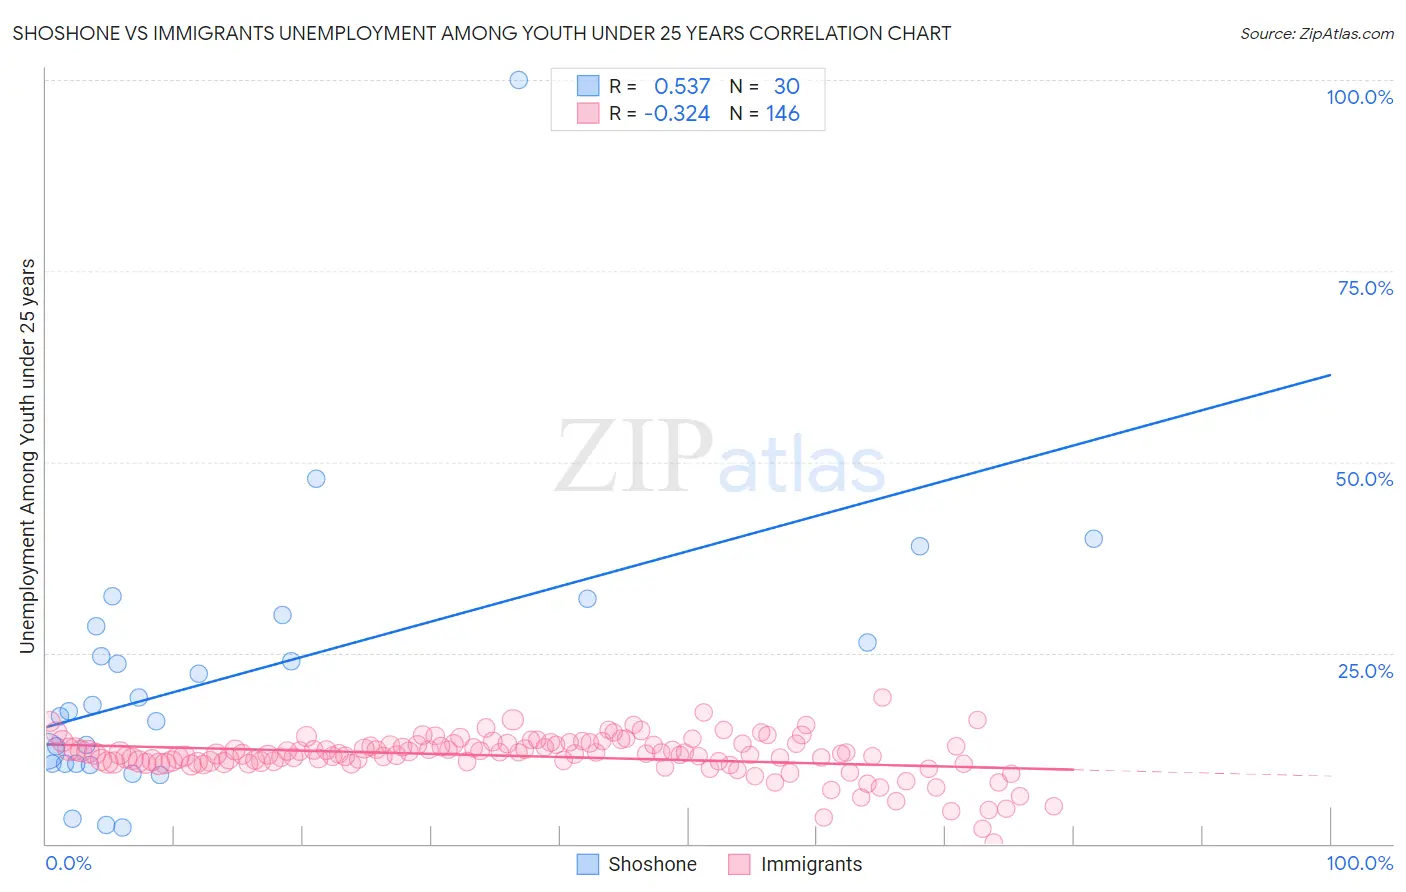 Shoshone vs Immigrants Unemployment Among Youth under 25 years